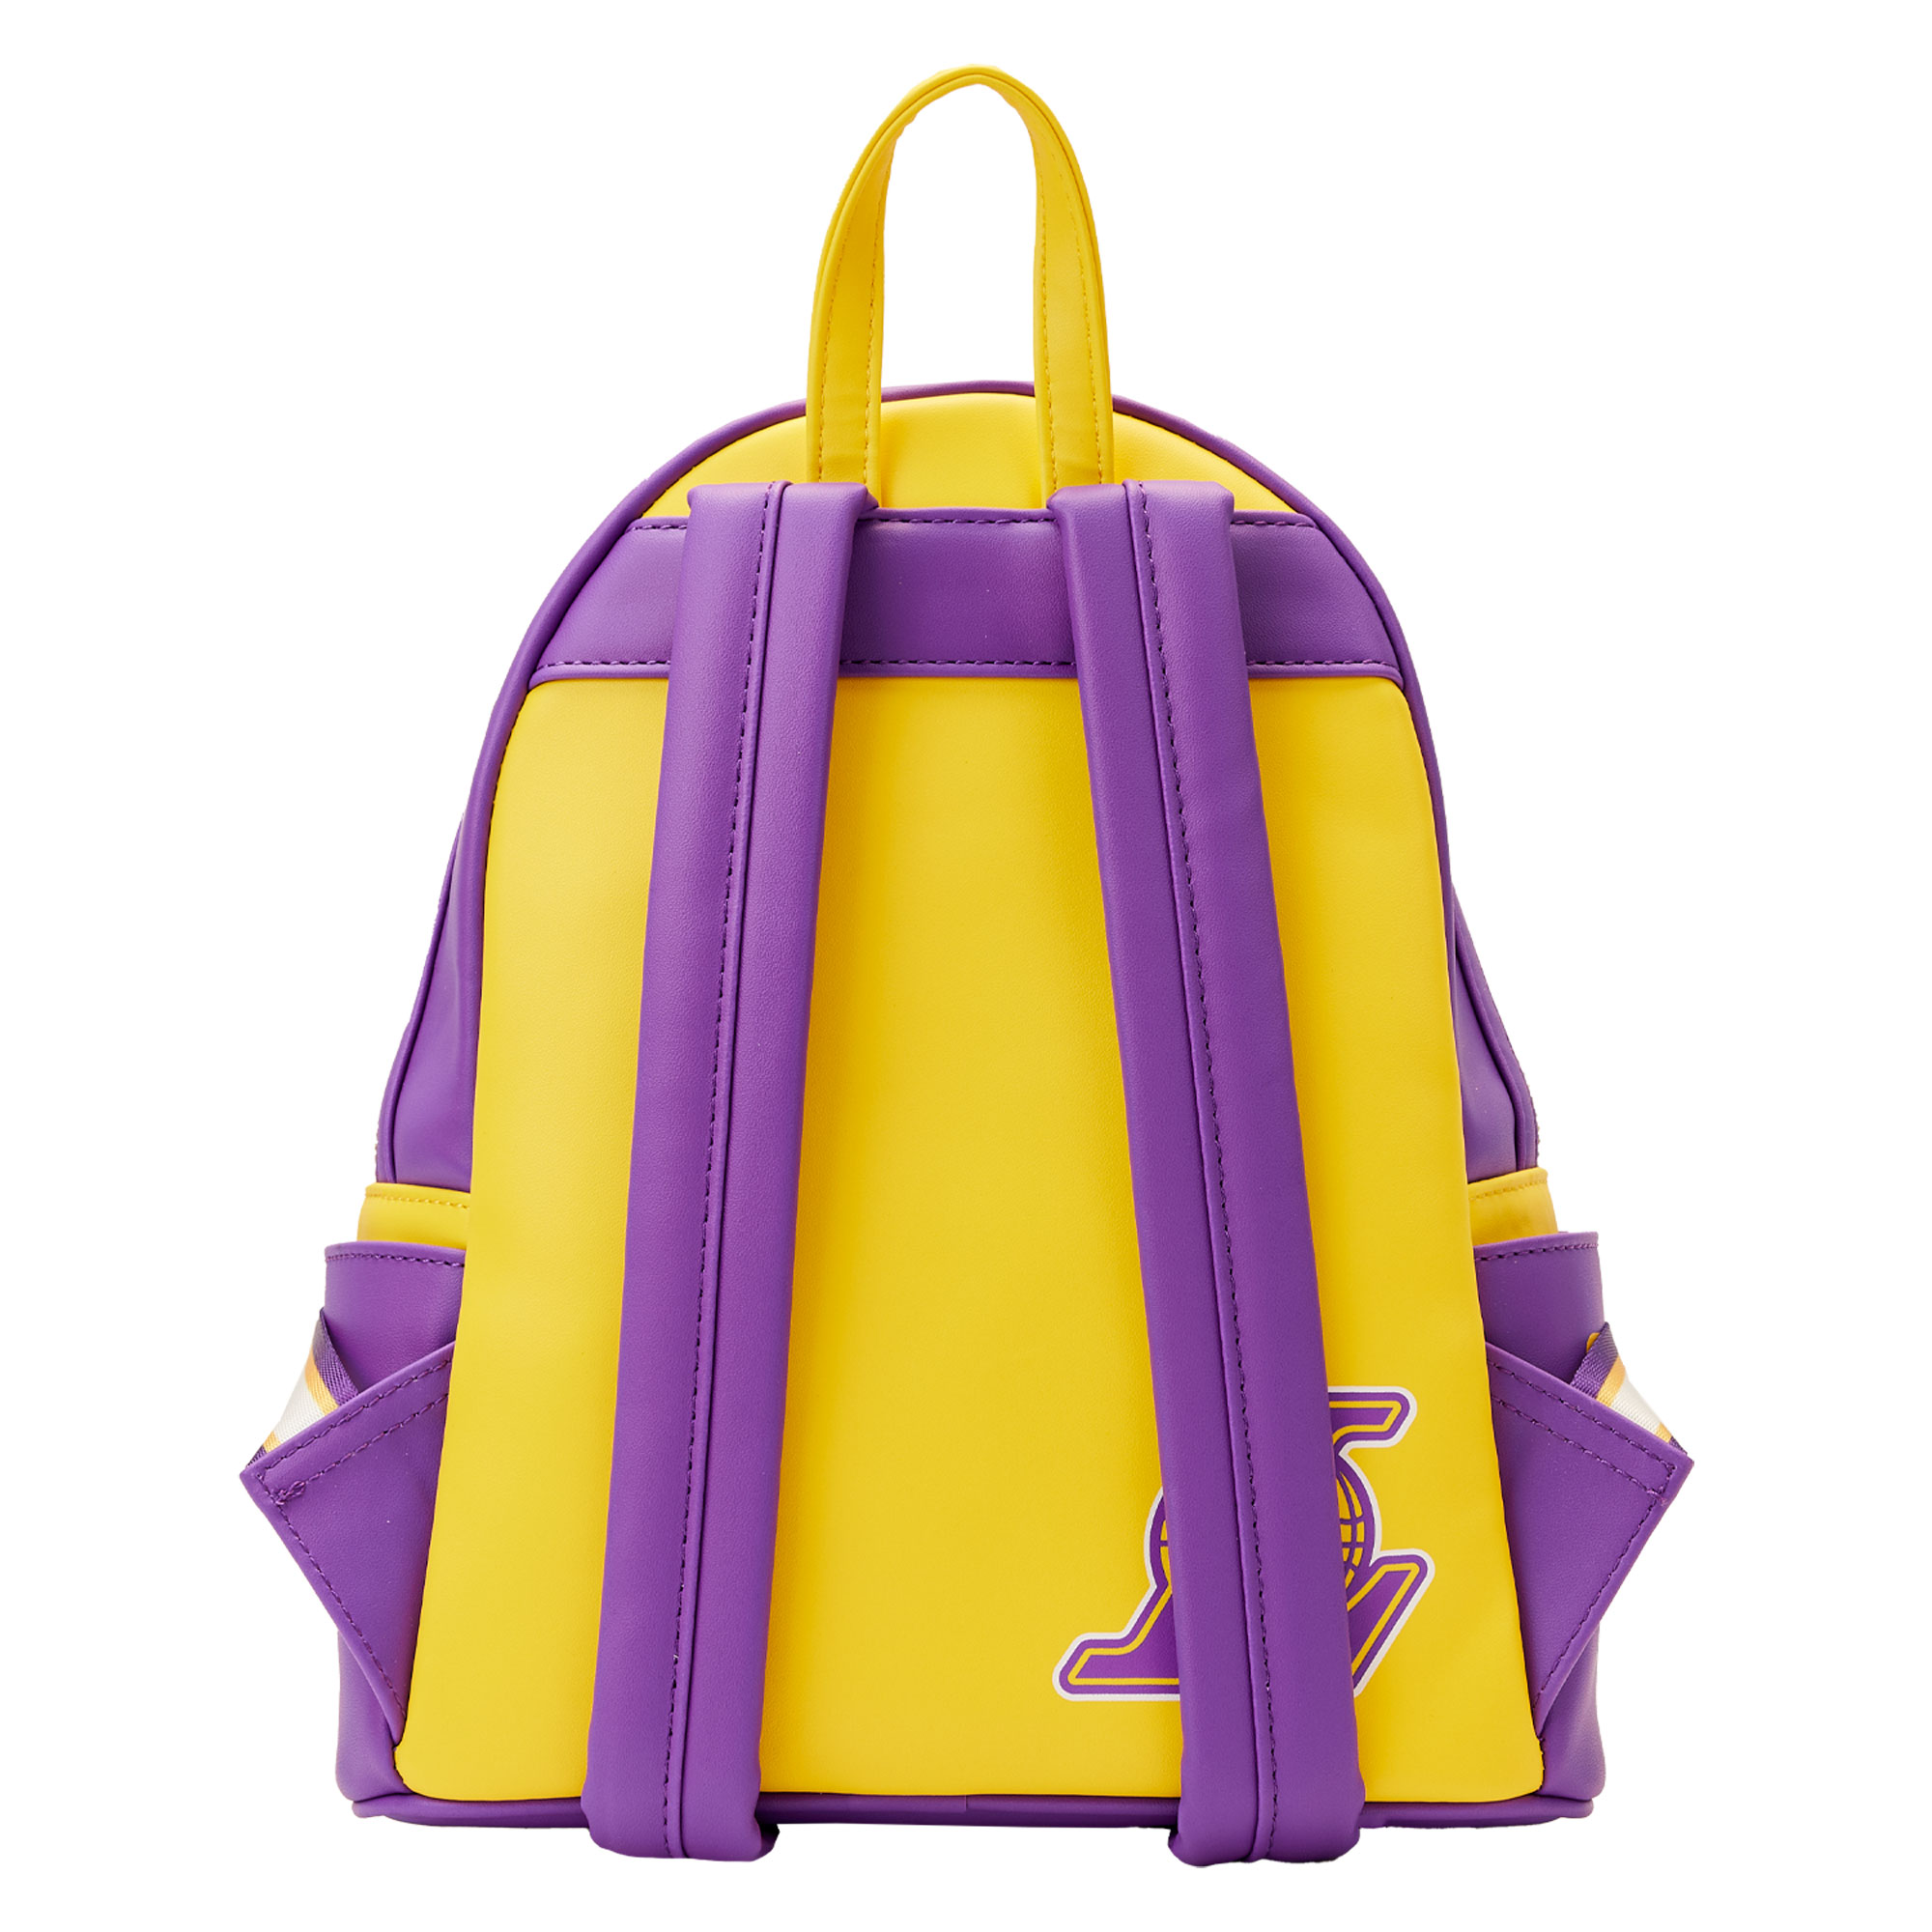 Loungefly Los Angeles Lakers Patches Mini Backpack - image 4 of 7